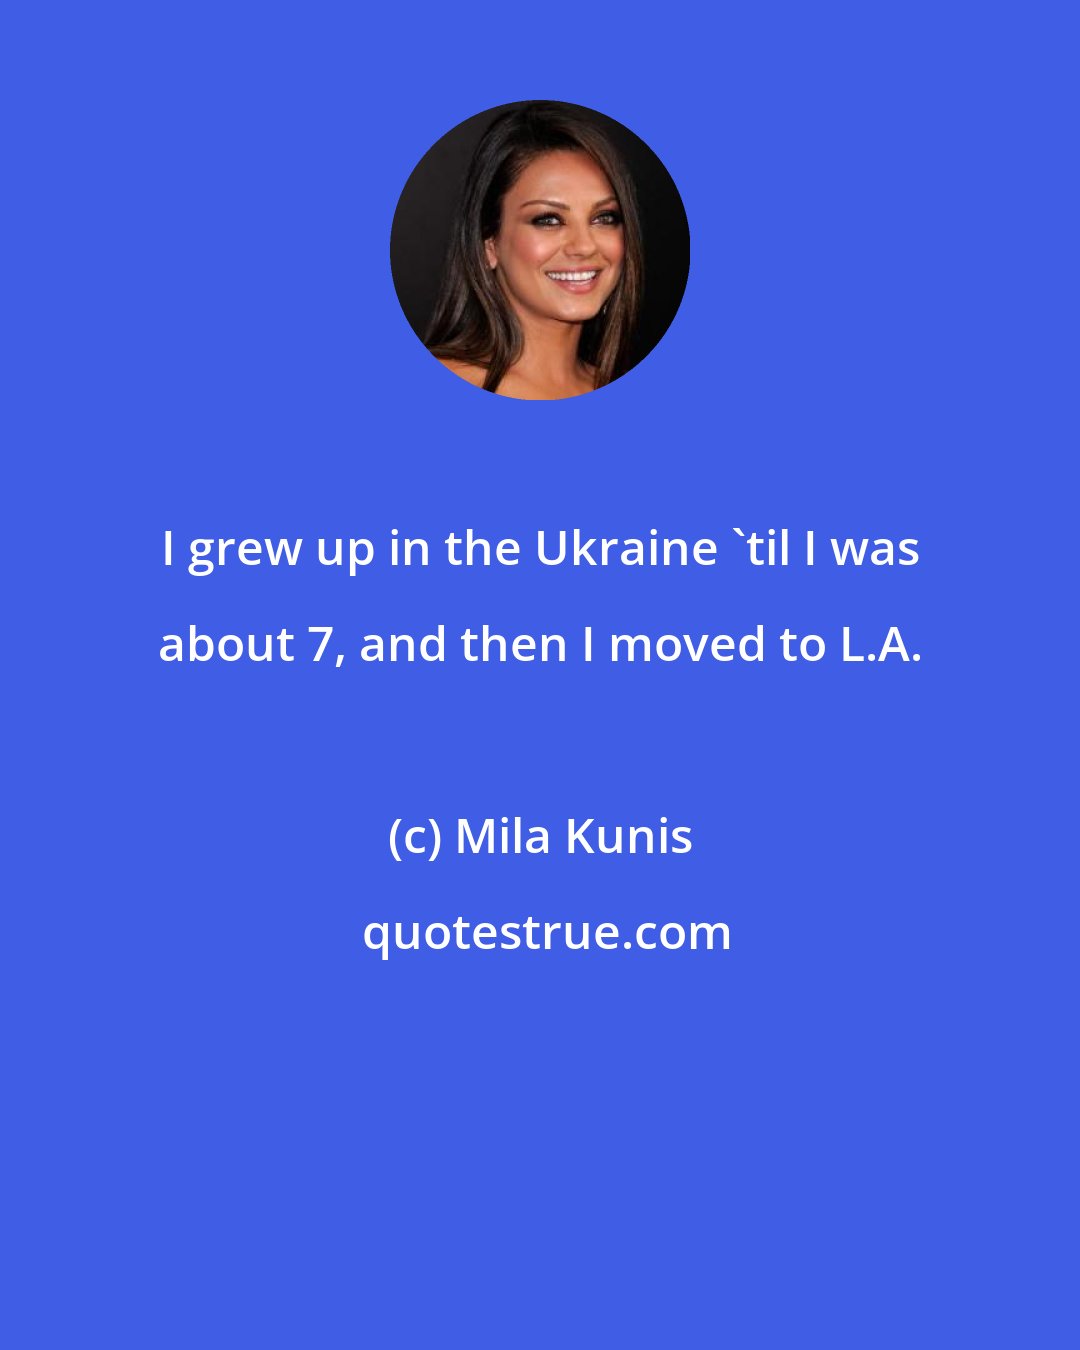 Mila Kunis: I grew up in the Ukraine 'til I was about 7, and then I moved to L.A.